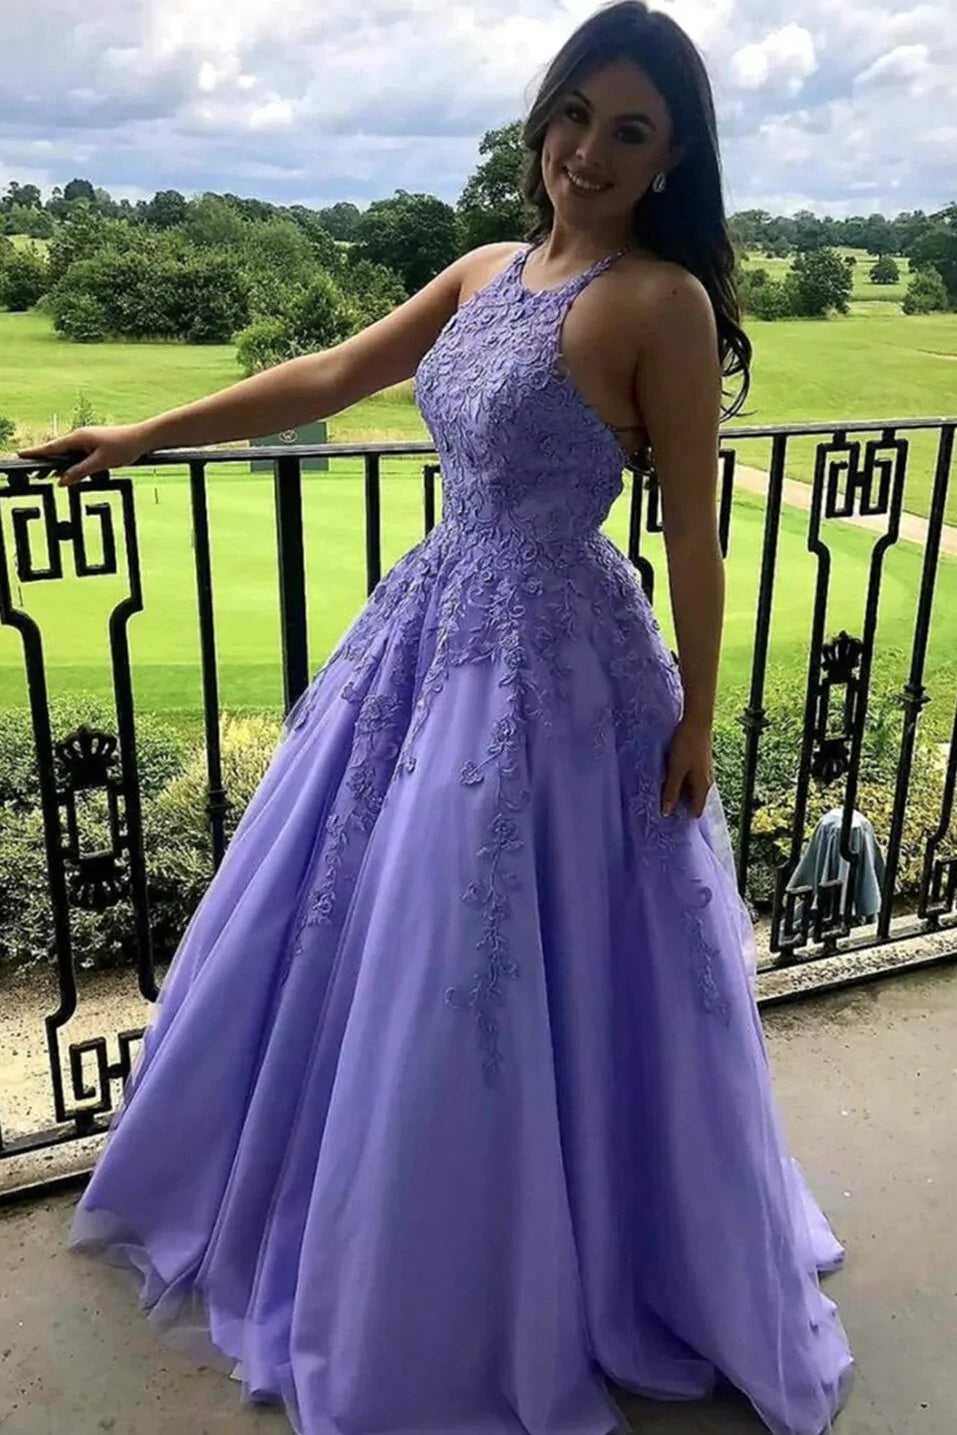 Chic A-line V neck Lilac Prom Dresses Tulle Long Evening Dress